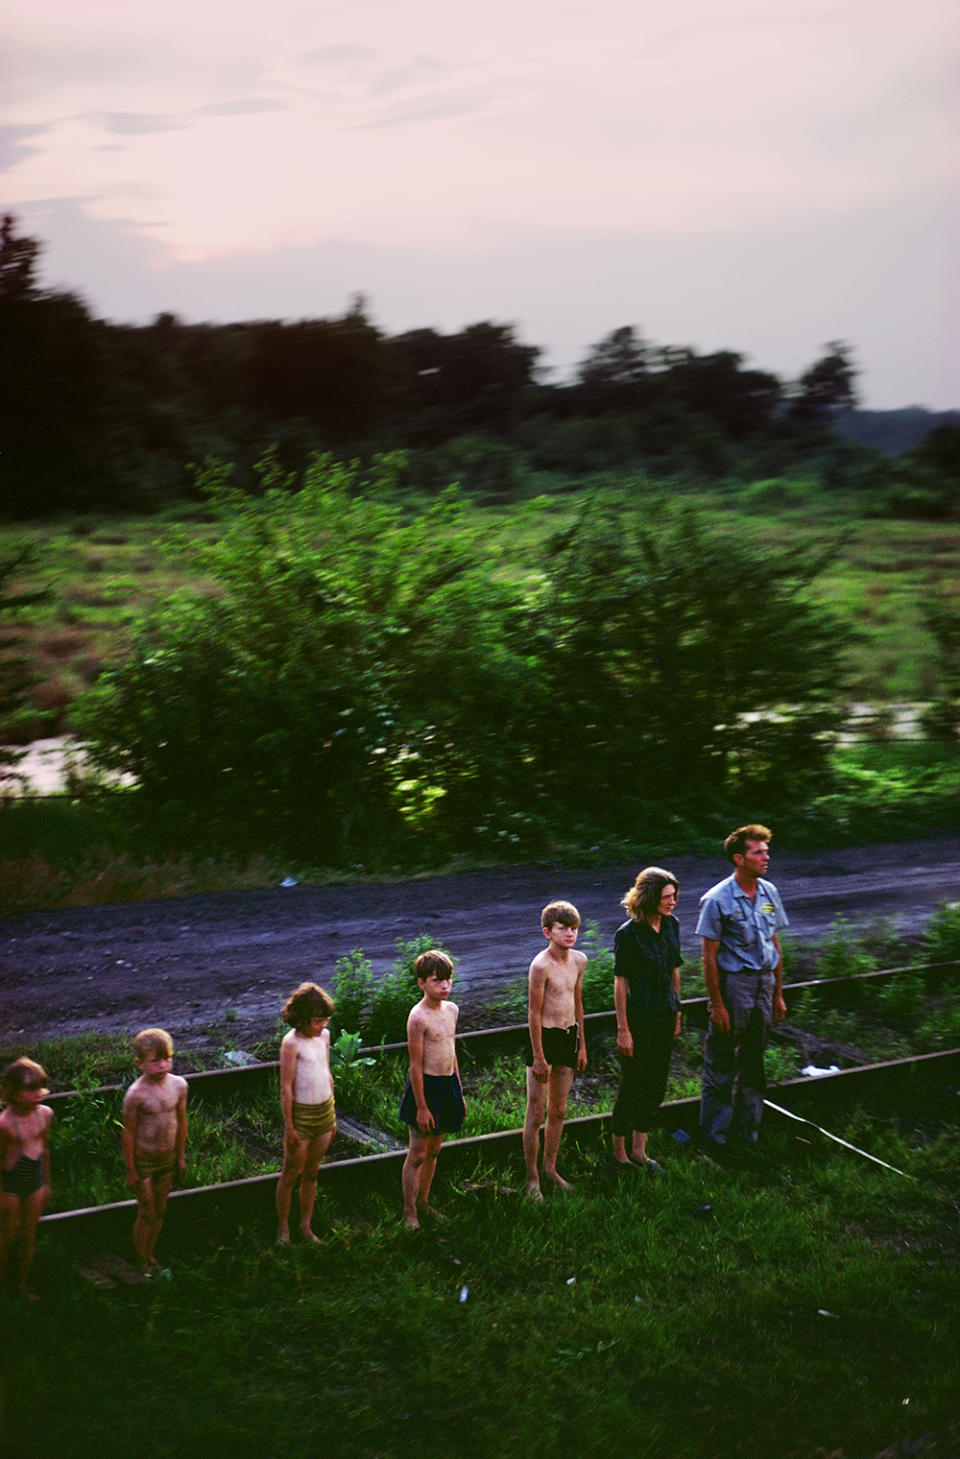 <p>Untitled from the series “RFK Funeral Train” 1968. (© Paul Fusco/Magnum Photos, courtesy of Danziger Gallery) </p>